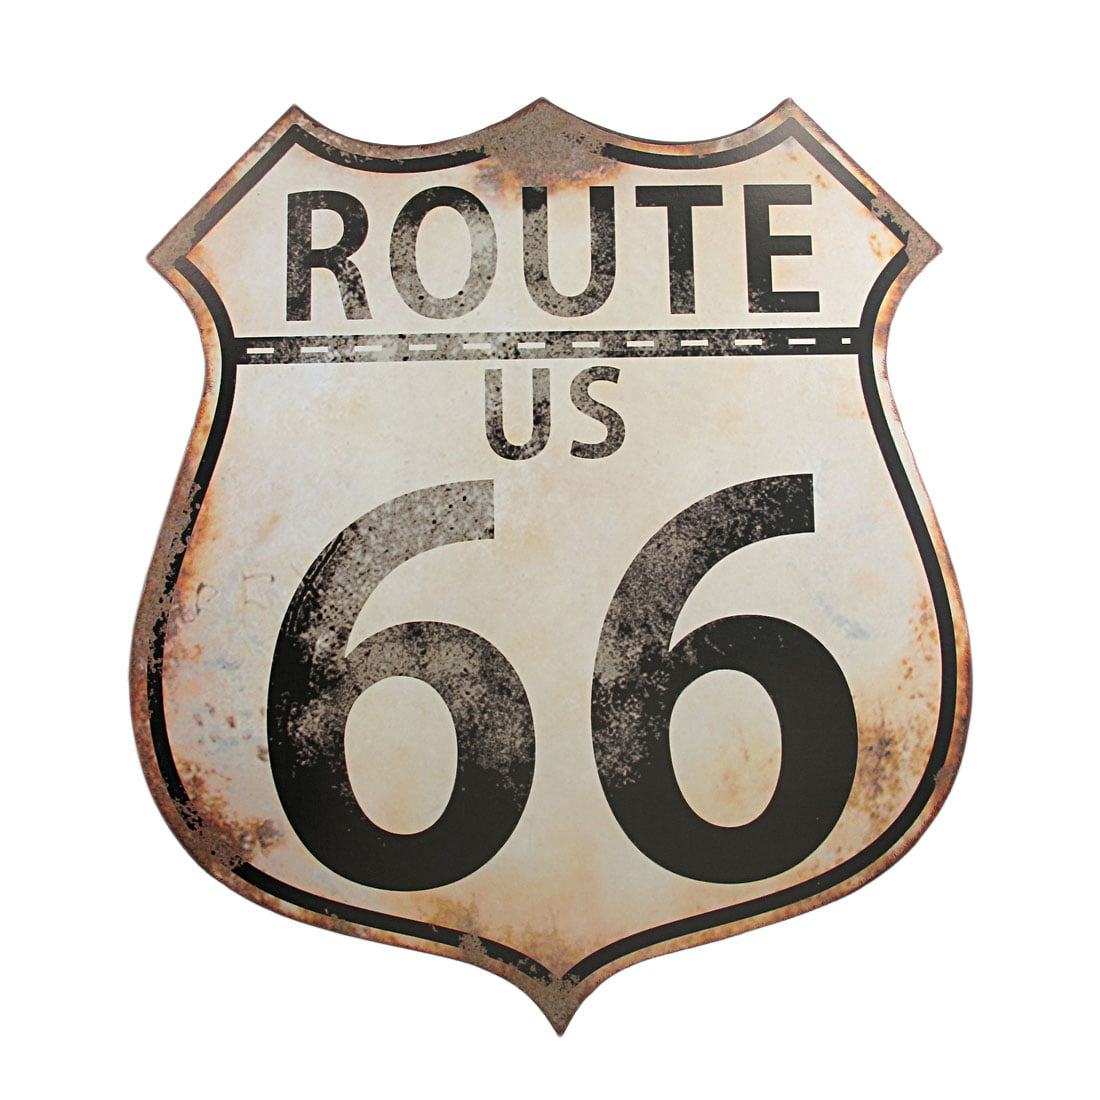 US ROUTE 66 BULLET HOLES 11.5 X 11.5" SHIELD METAL TIN EMBOSSED SIGN BAR RUSTY 